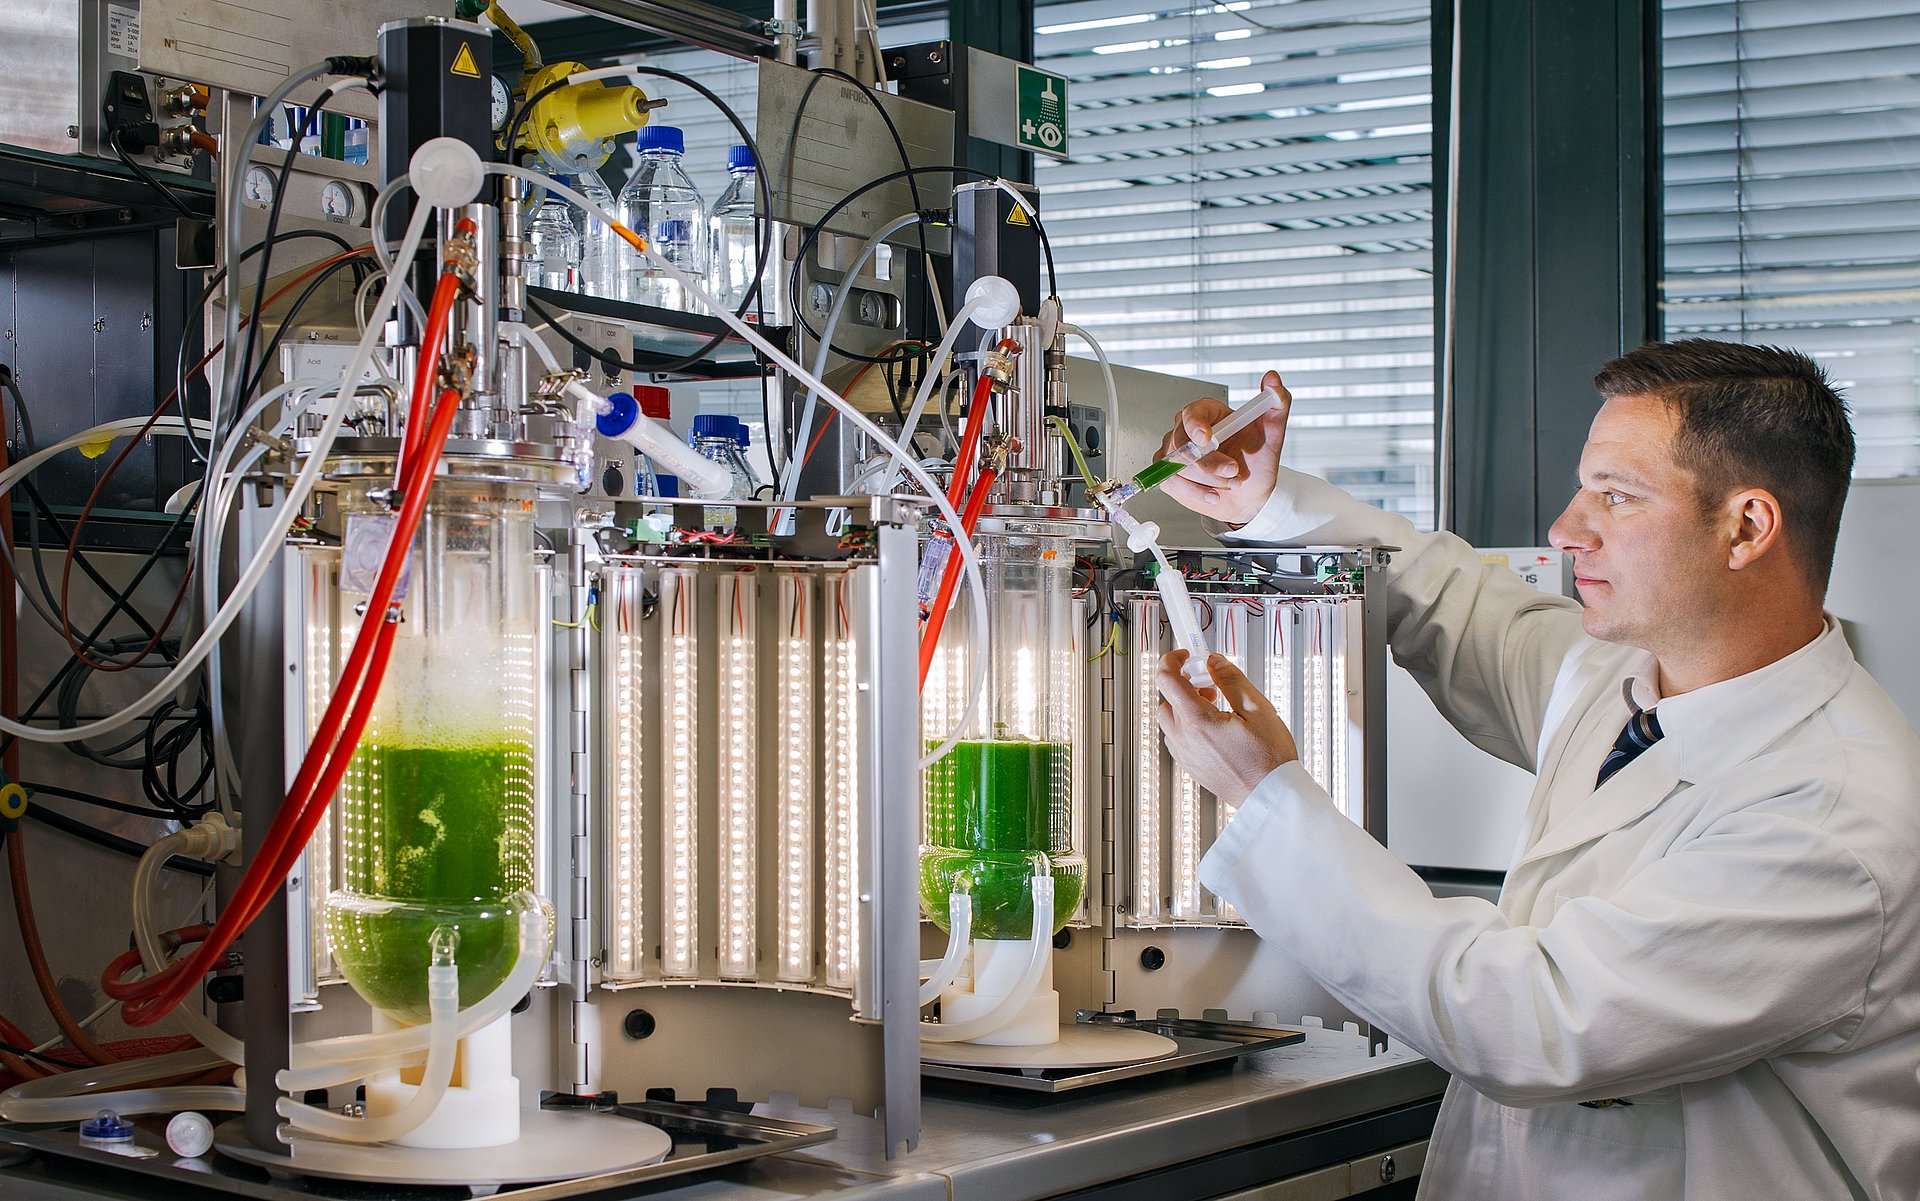 Prof. Thomas Brück taking samples at the photobioreactor at the Werner Siemens-Chair of Synthetic Biotechnology. The researchers used these bioreactors to produce biomass of the strains of cyanobacteria for the study. 